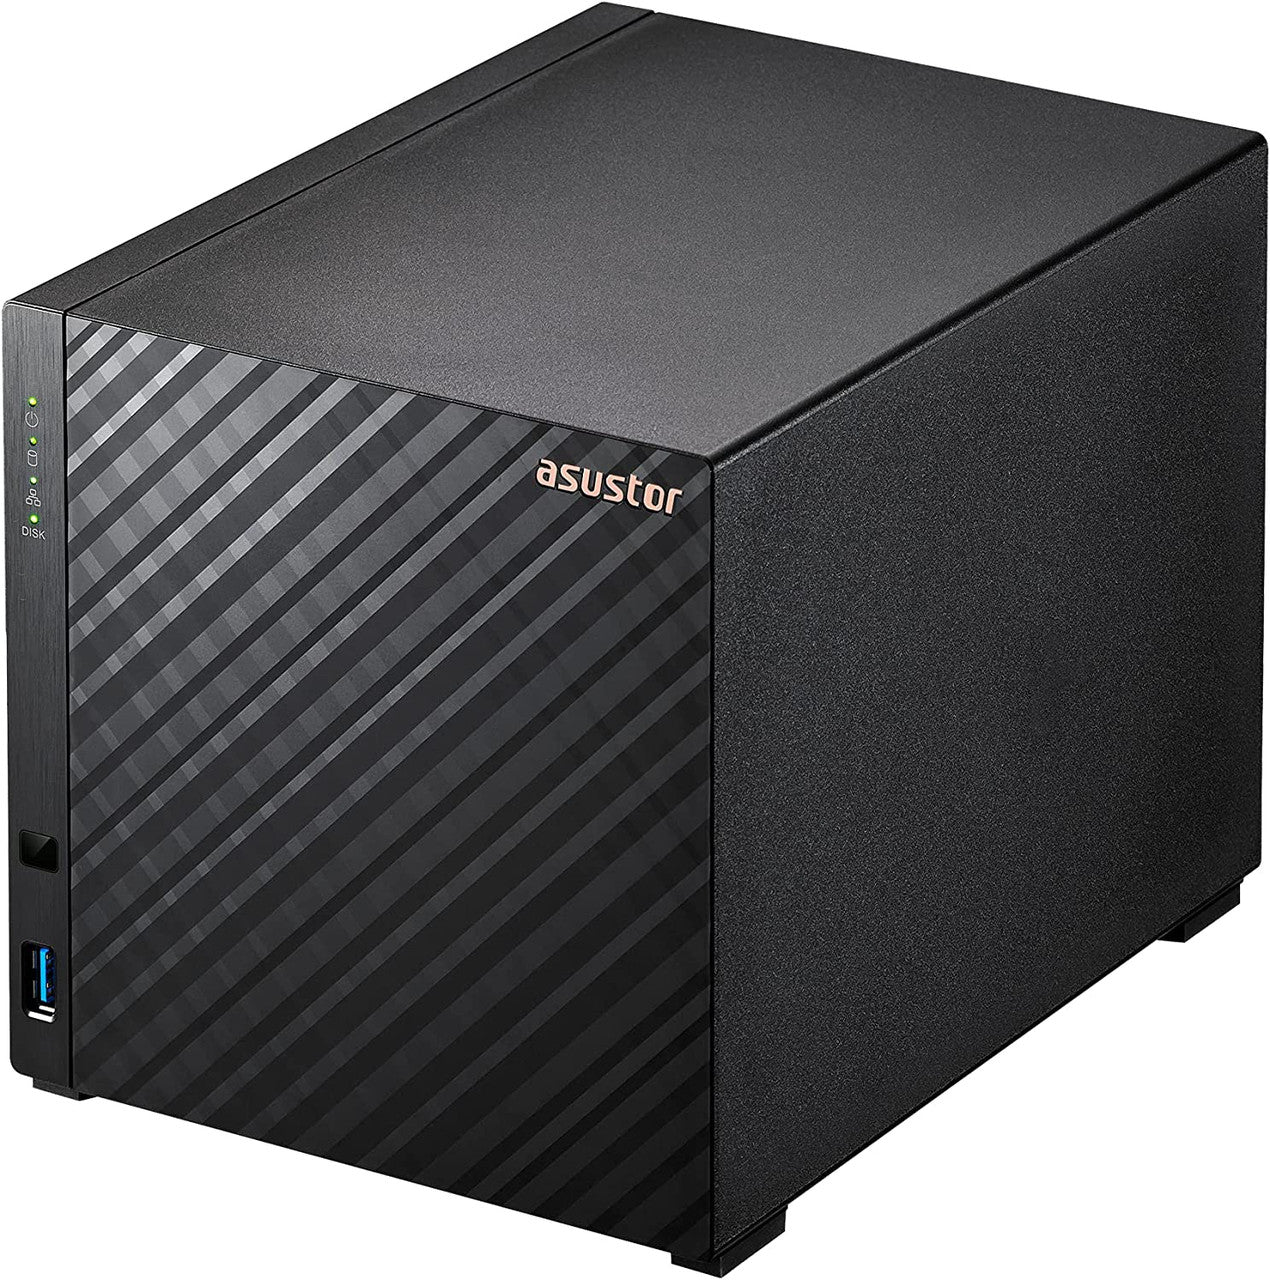 Asustor AS1104T 4-Bay Drivestor 4 NAS with 1GB RAM and 48TB (4x12TB) Western Digital RED Plus Drives